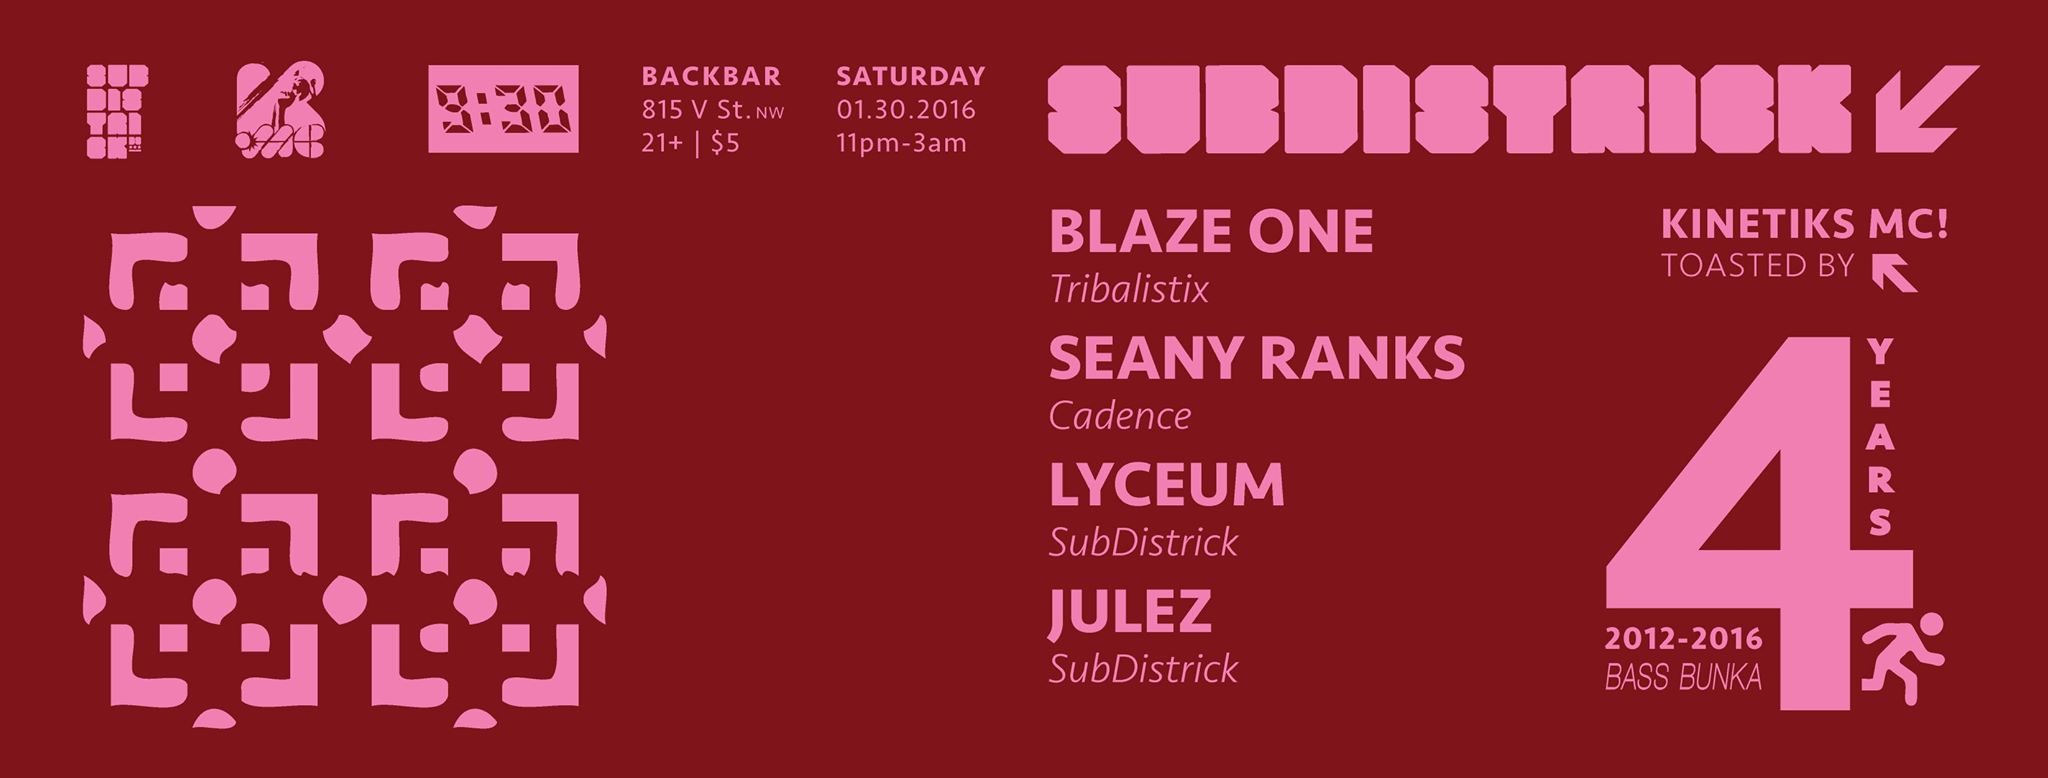 SubDistrick!! 1/30/16 - 4 Year Anniversary! - Featuring Blaze One, Seany Ranks, Lyceum, and Julez! - hosted by kinetiks MC